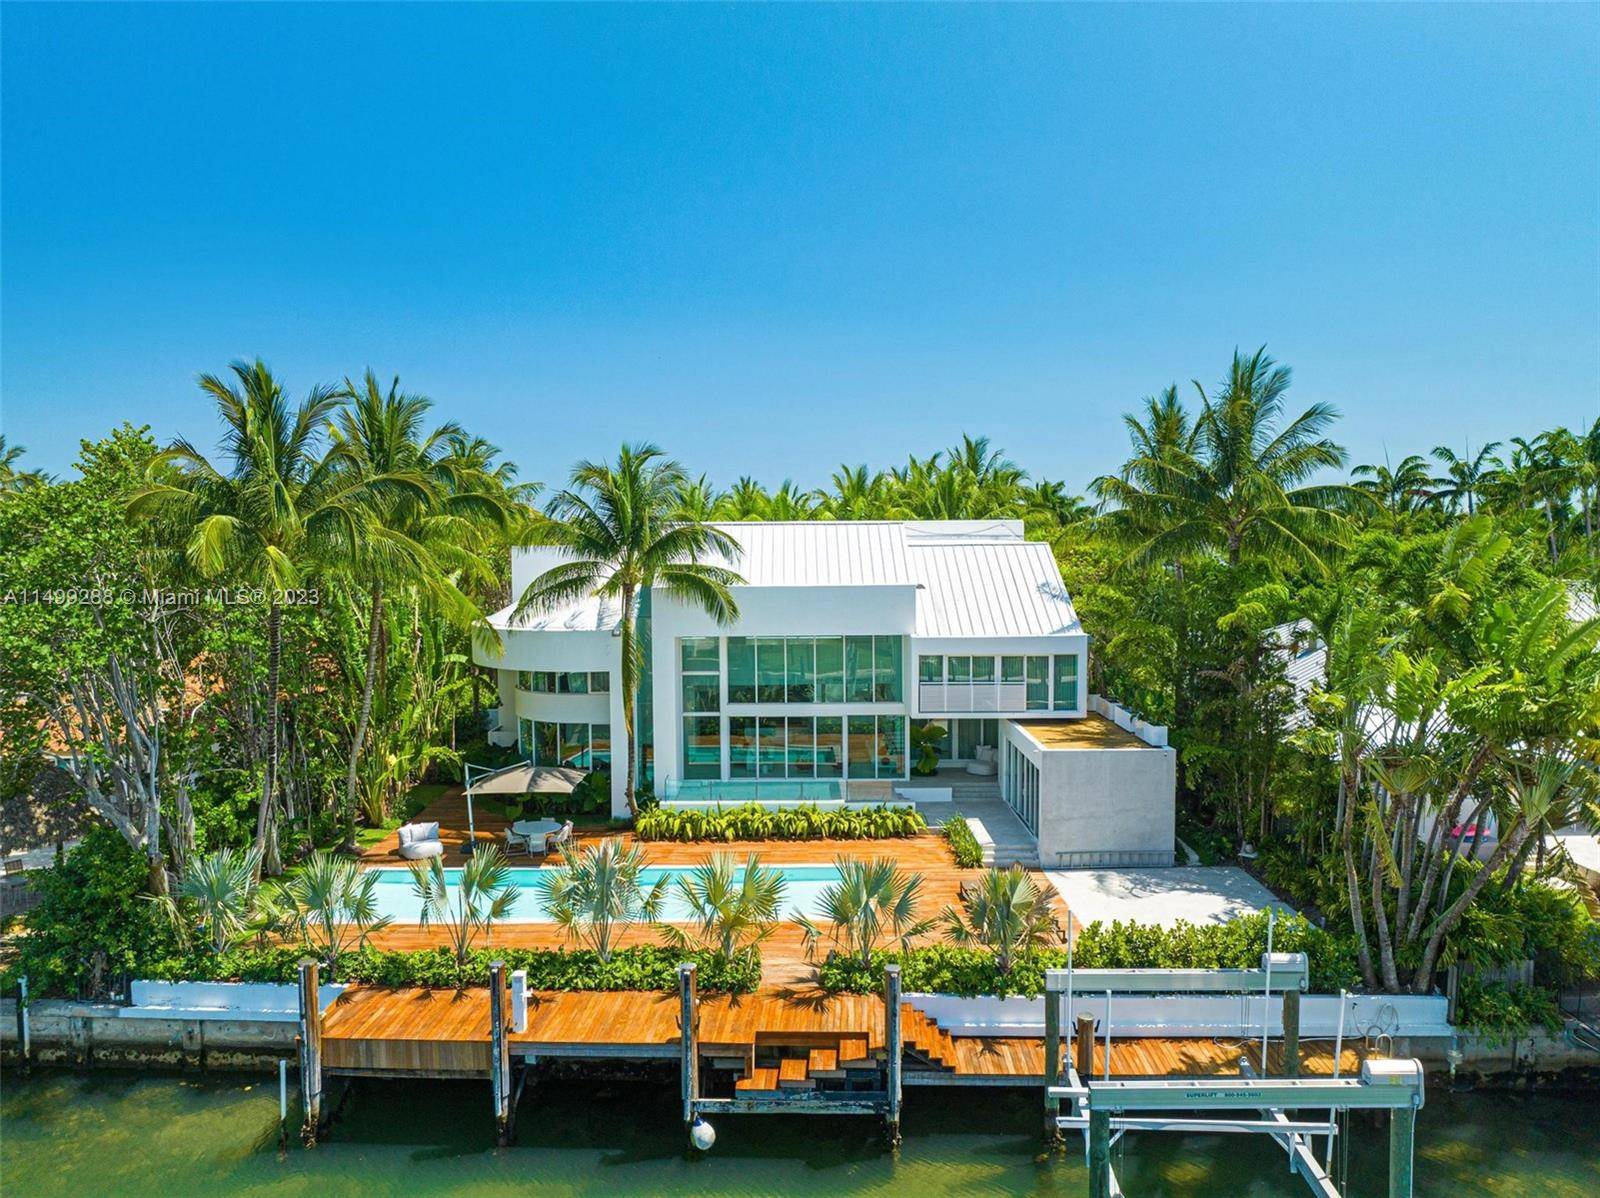 Experience luxury living at its finest in this stunning Key Biscayne waterfront home.